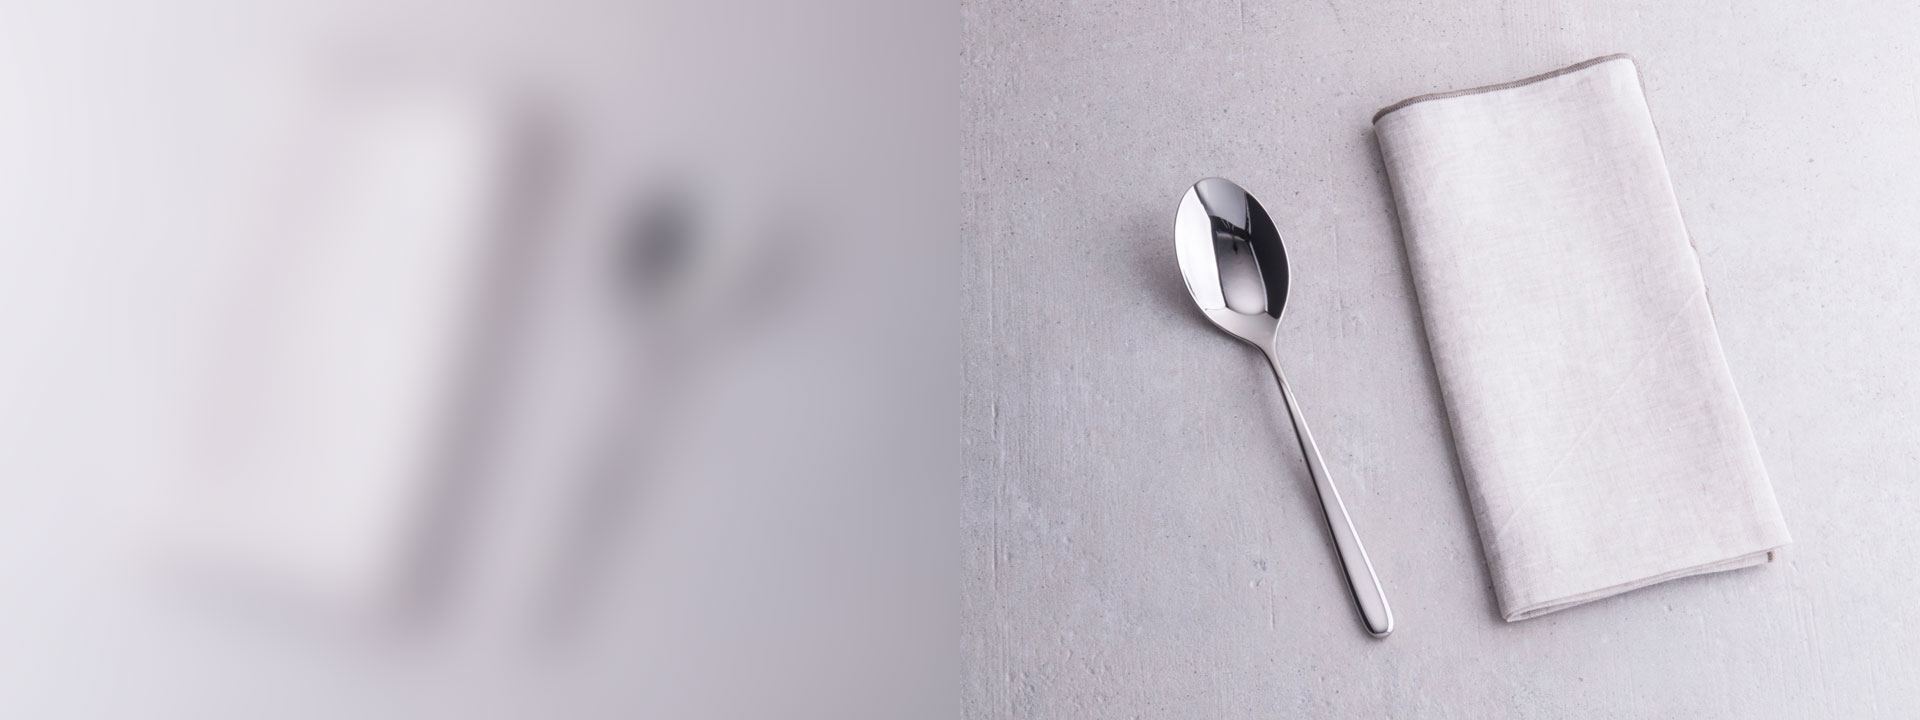 Table spoons